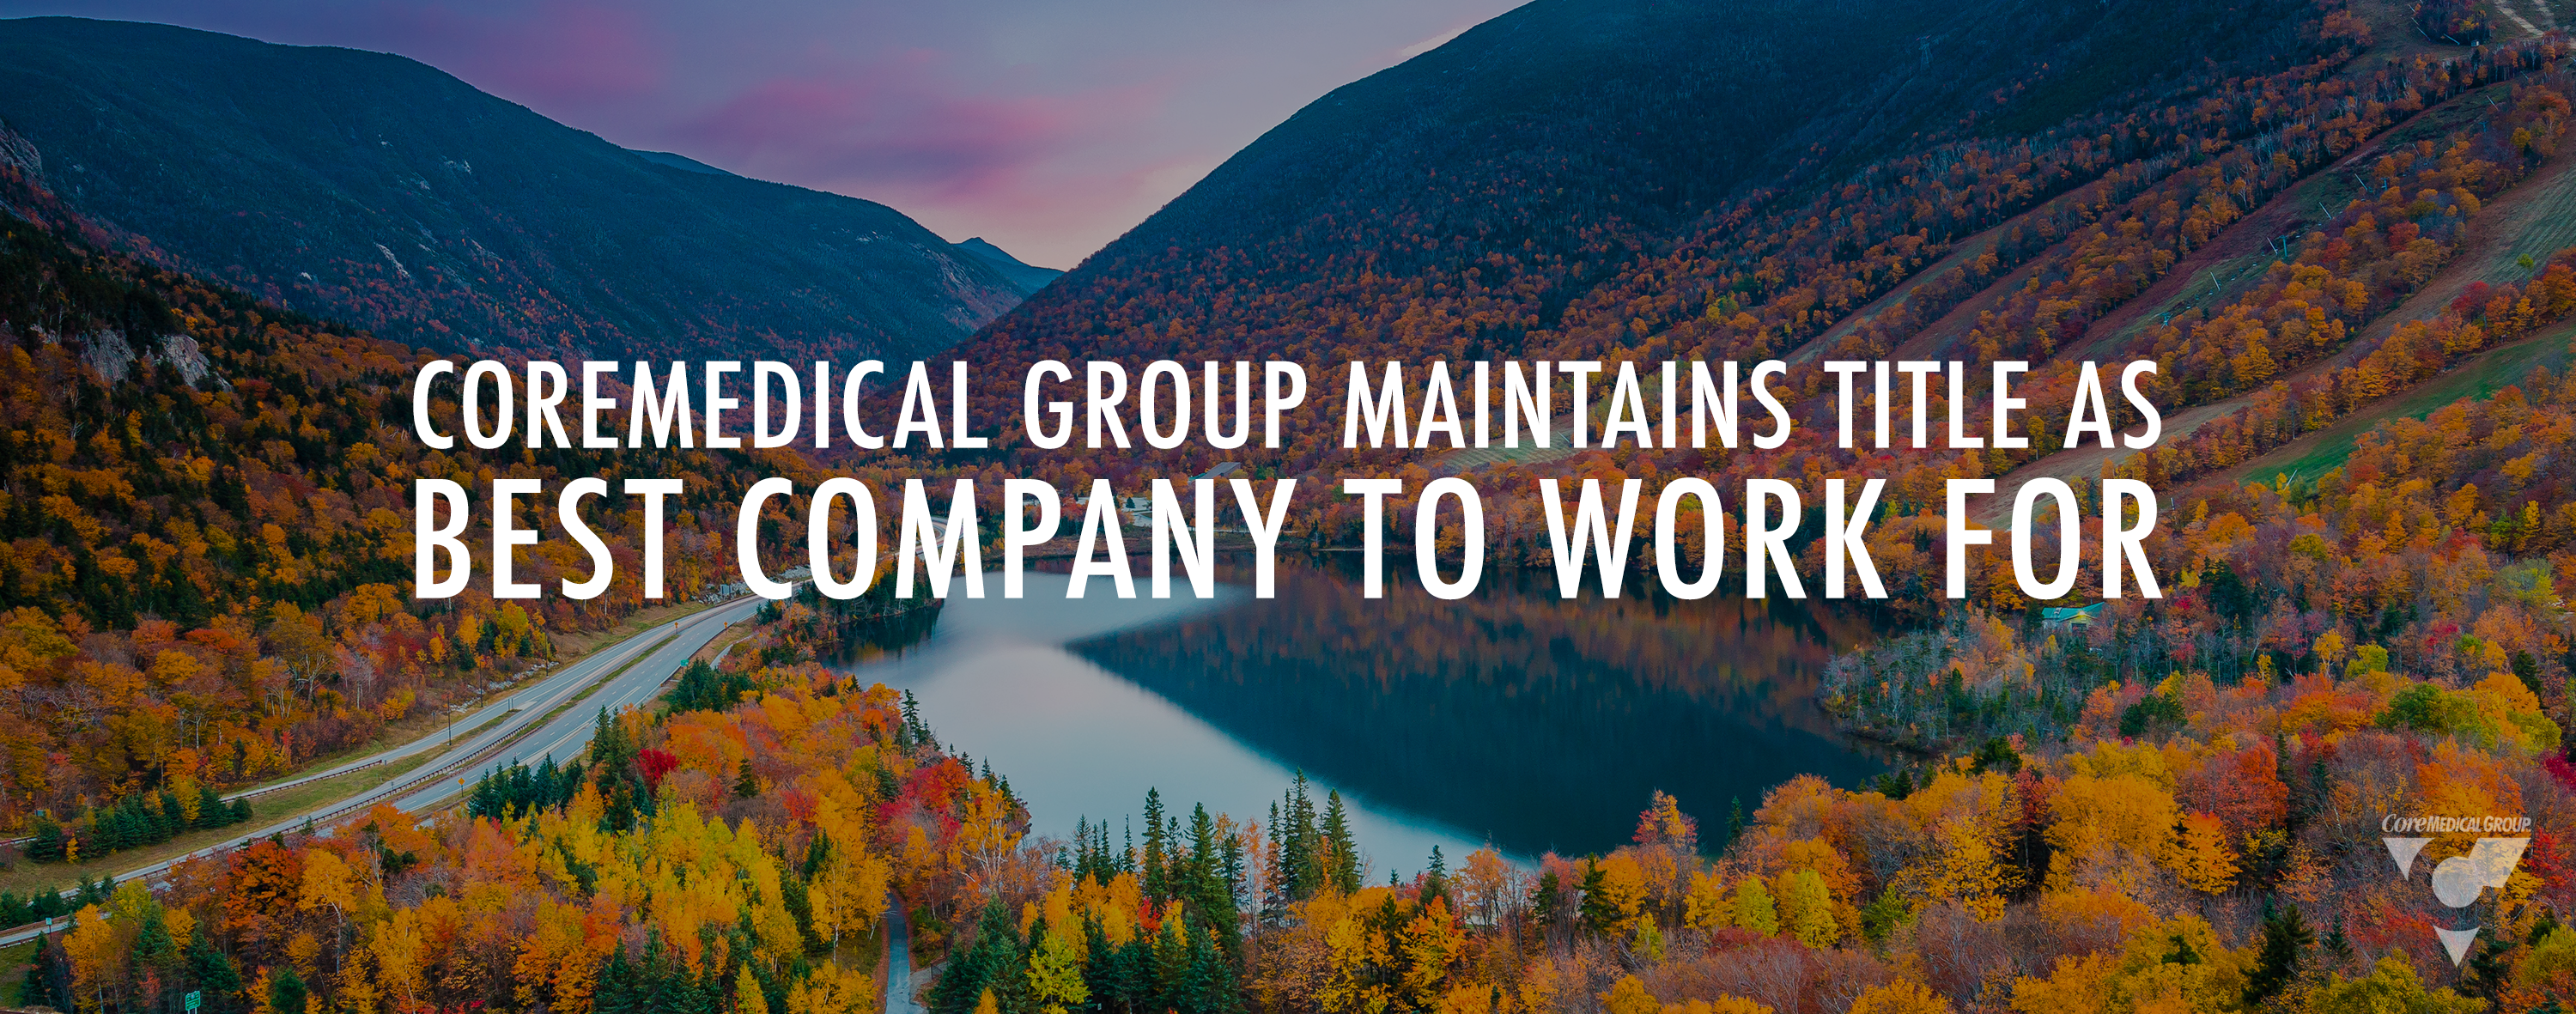 CMG_Blog_CoreMedical-Group-Named-A-Best-Company-to-Work-For-by-Business-NH-Magazine_R1_09....